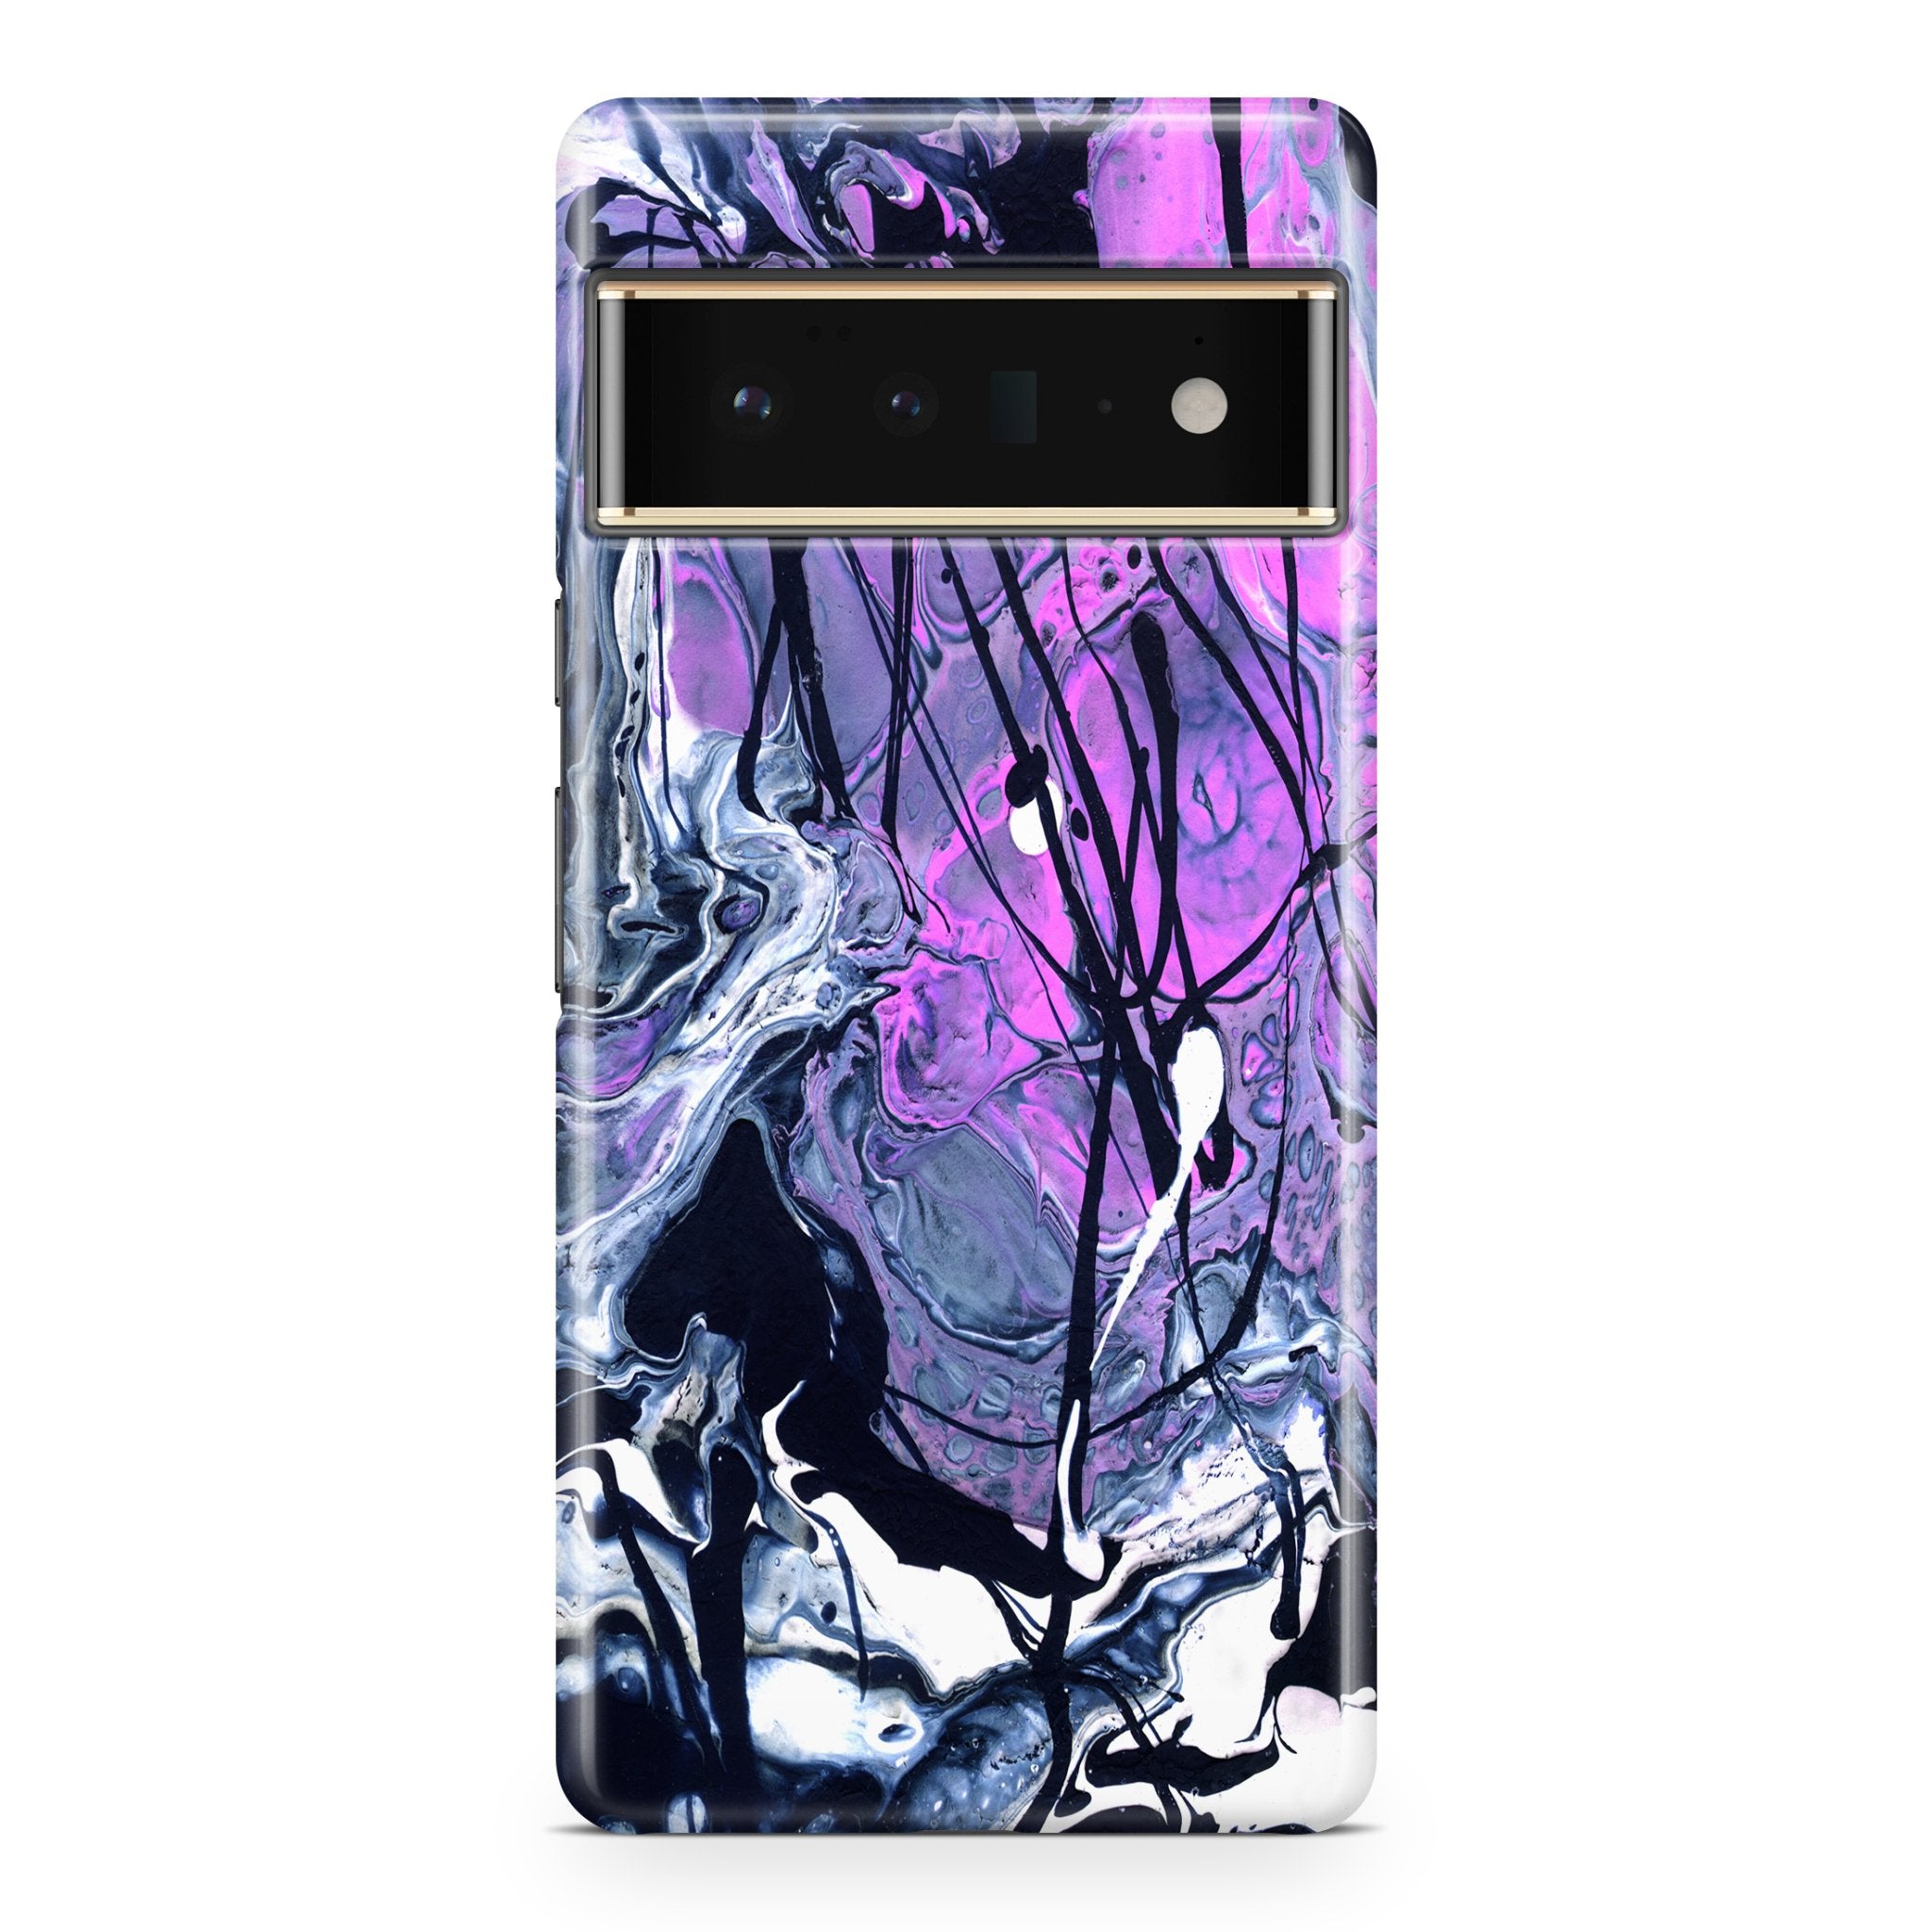 Pink Fluid Acrylic - Google phone case designs by CaseSwagger